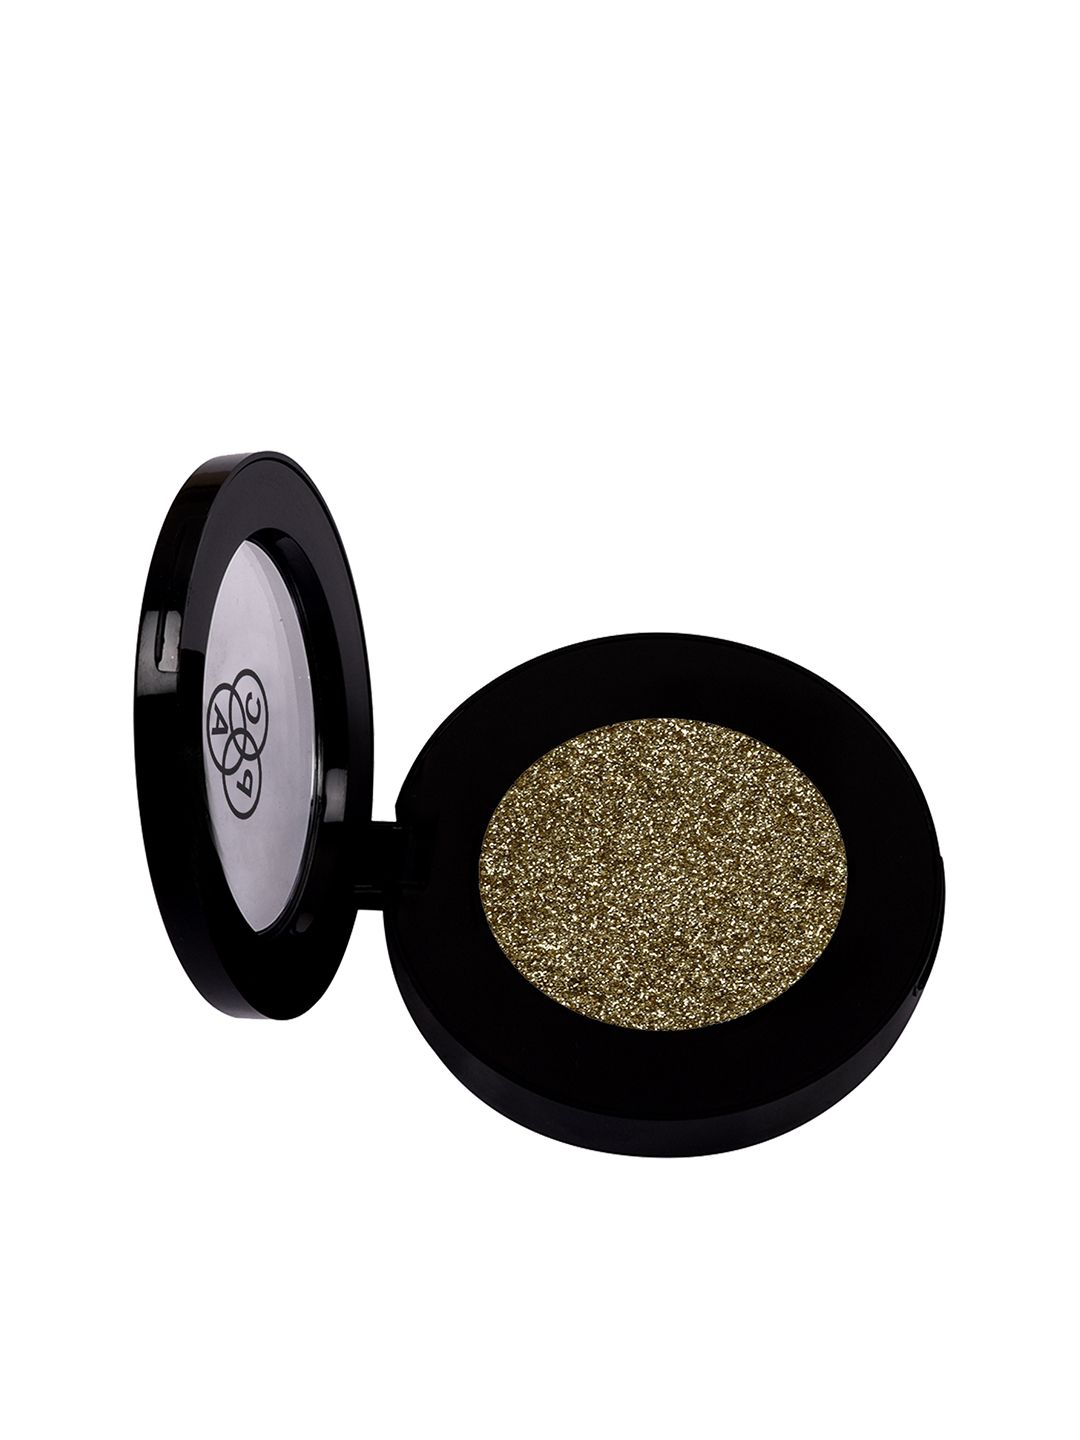 PAC 02 Party Animal Pressed Glitter Eyeshadow 3g Price in India